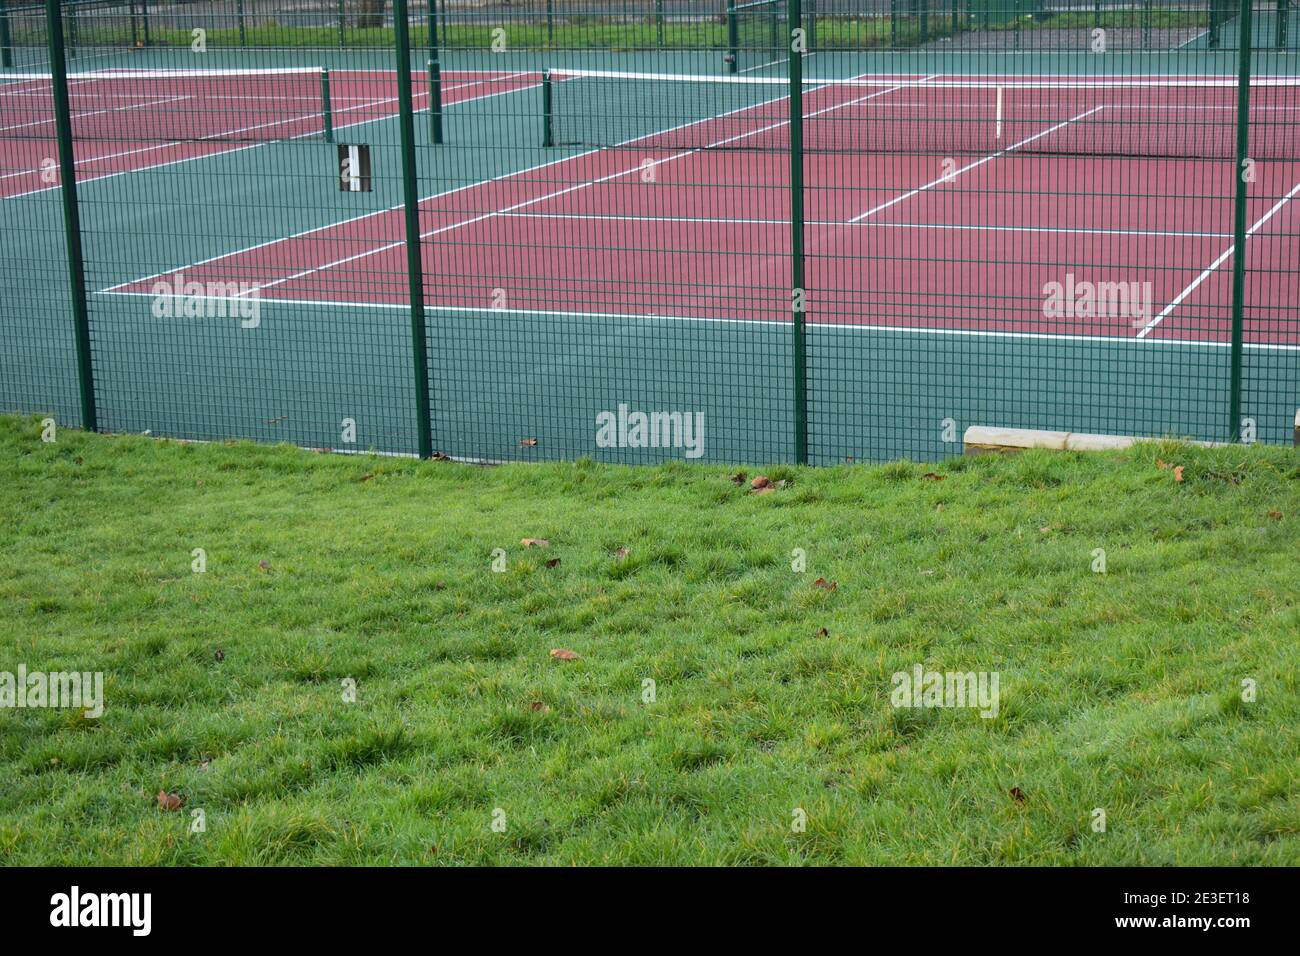 Hard asphalt or concrete coated with various materials tennis court is faster than clay but not as fast as grass for players with big serves forehands Stock Photo